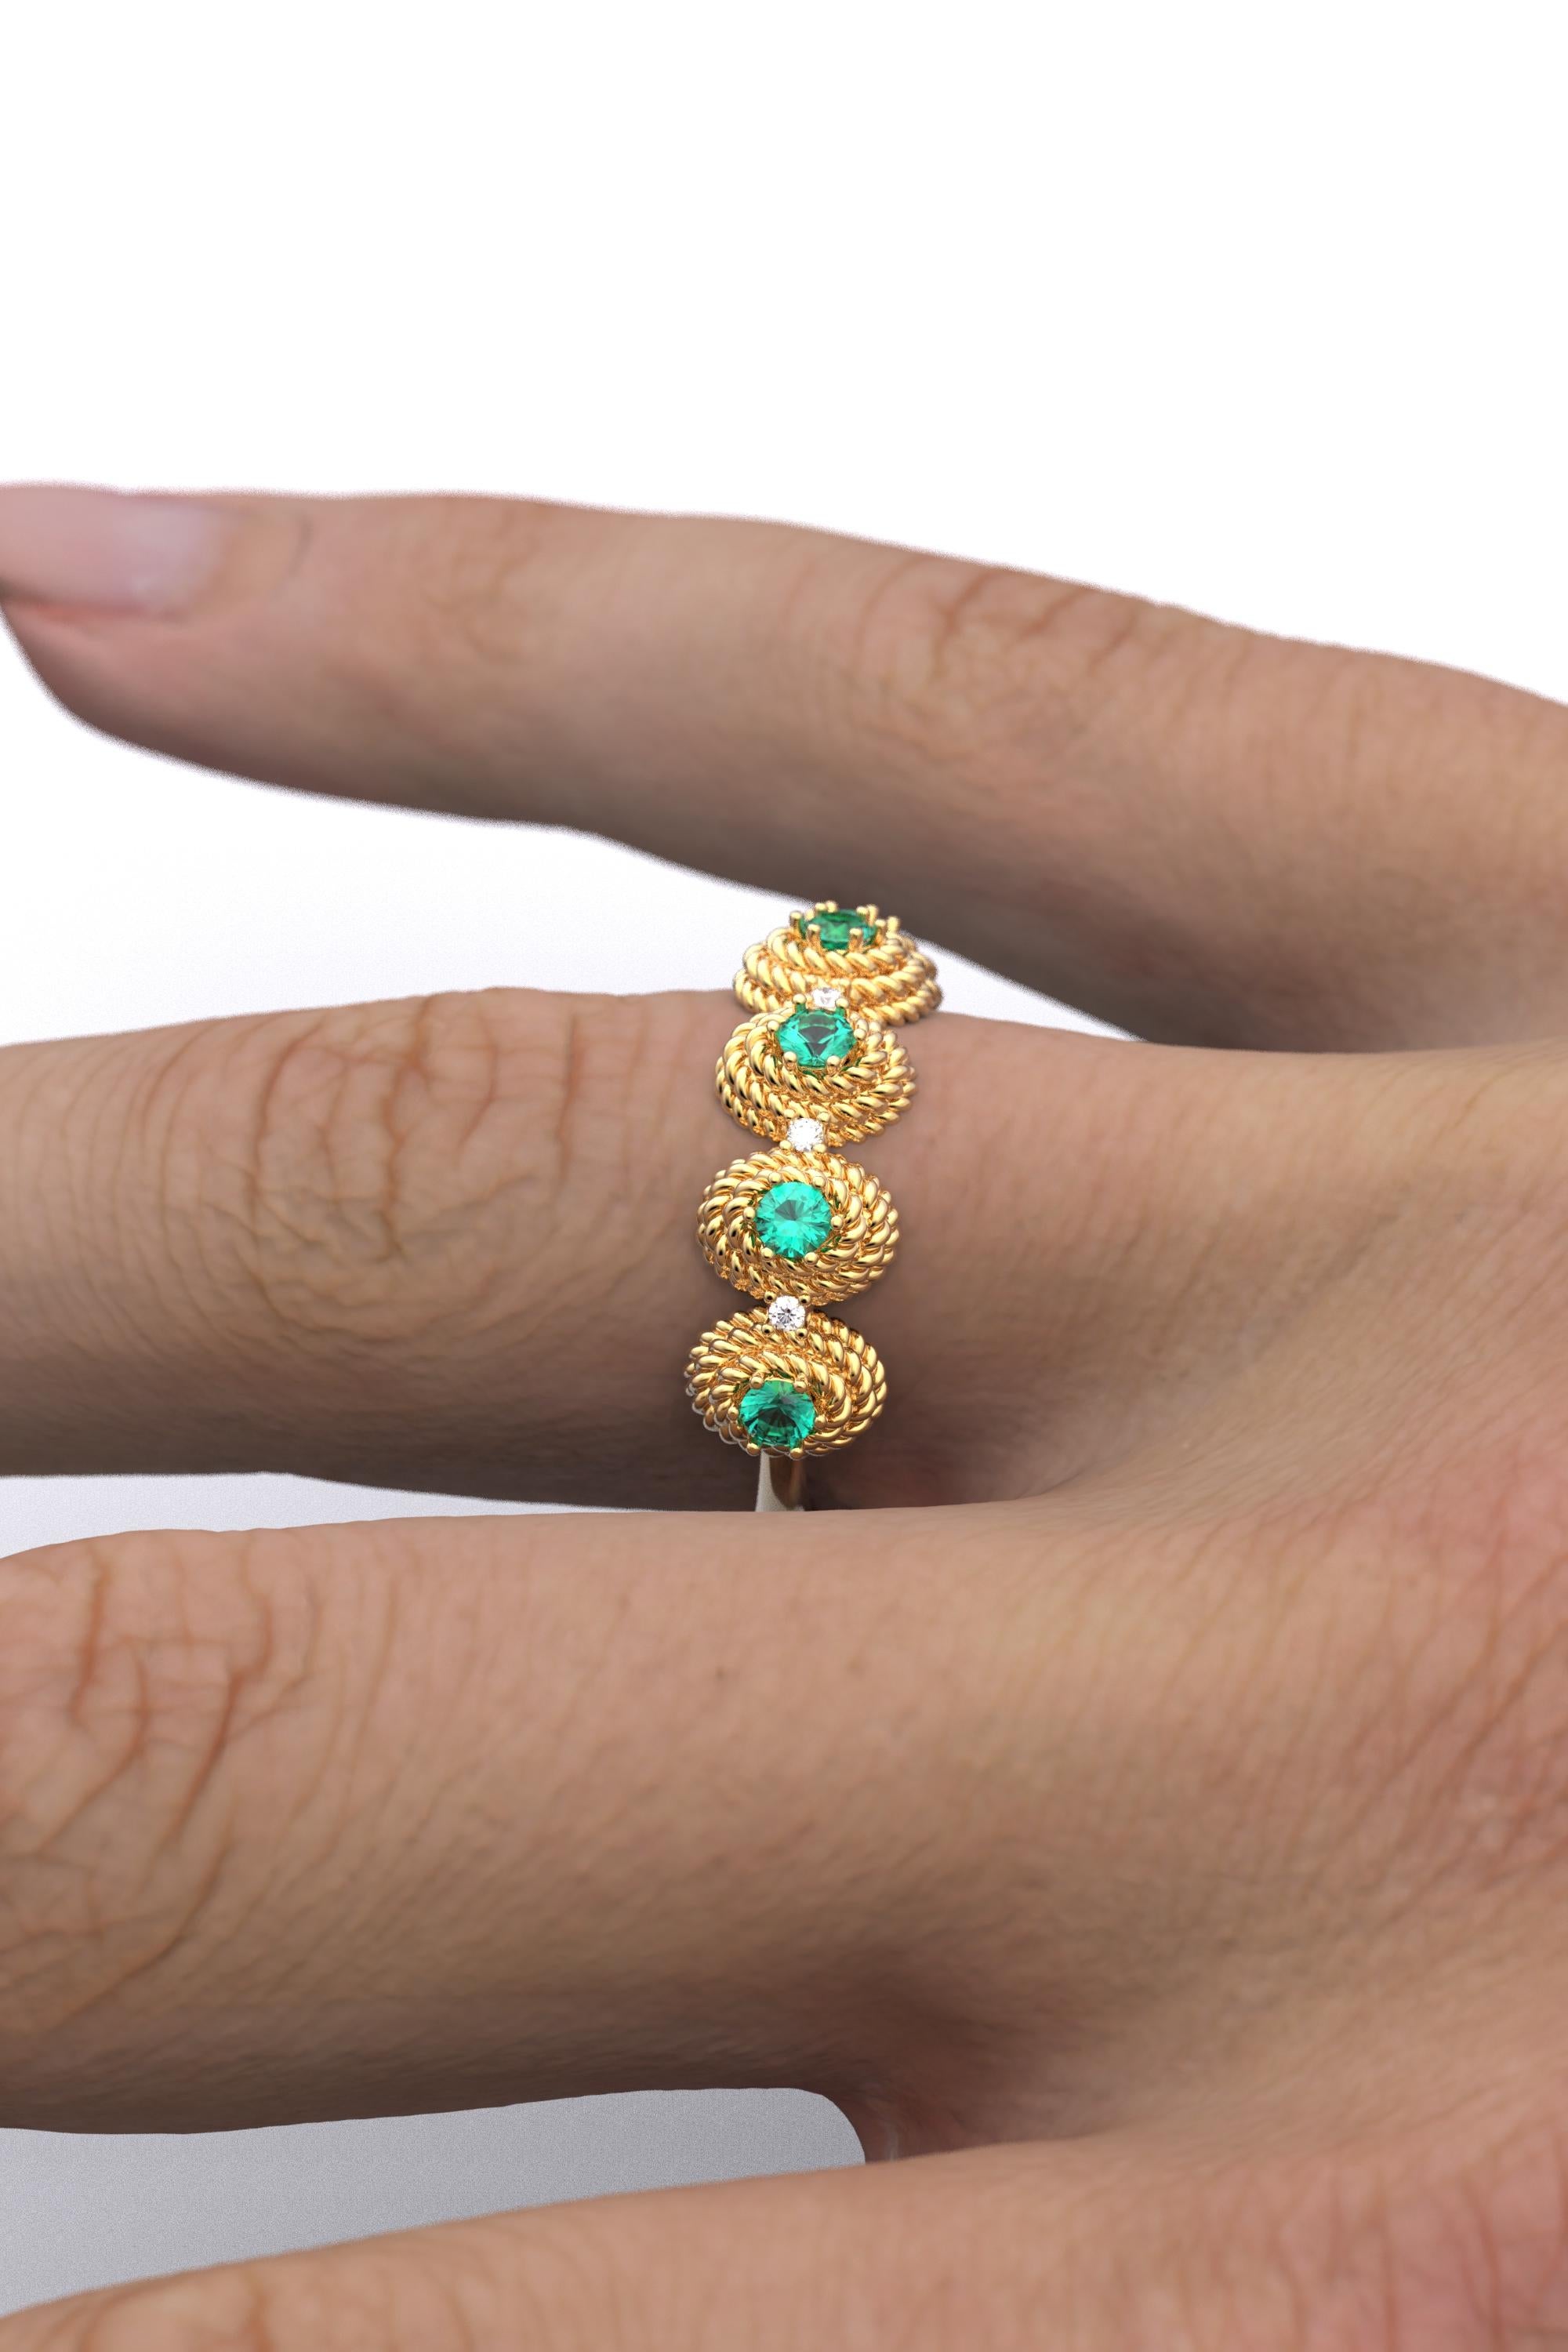 For Sale:  Emerald and Diamond Ring Made in Italy in 14k Gold by Oltremare Gioielli 4